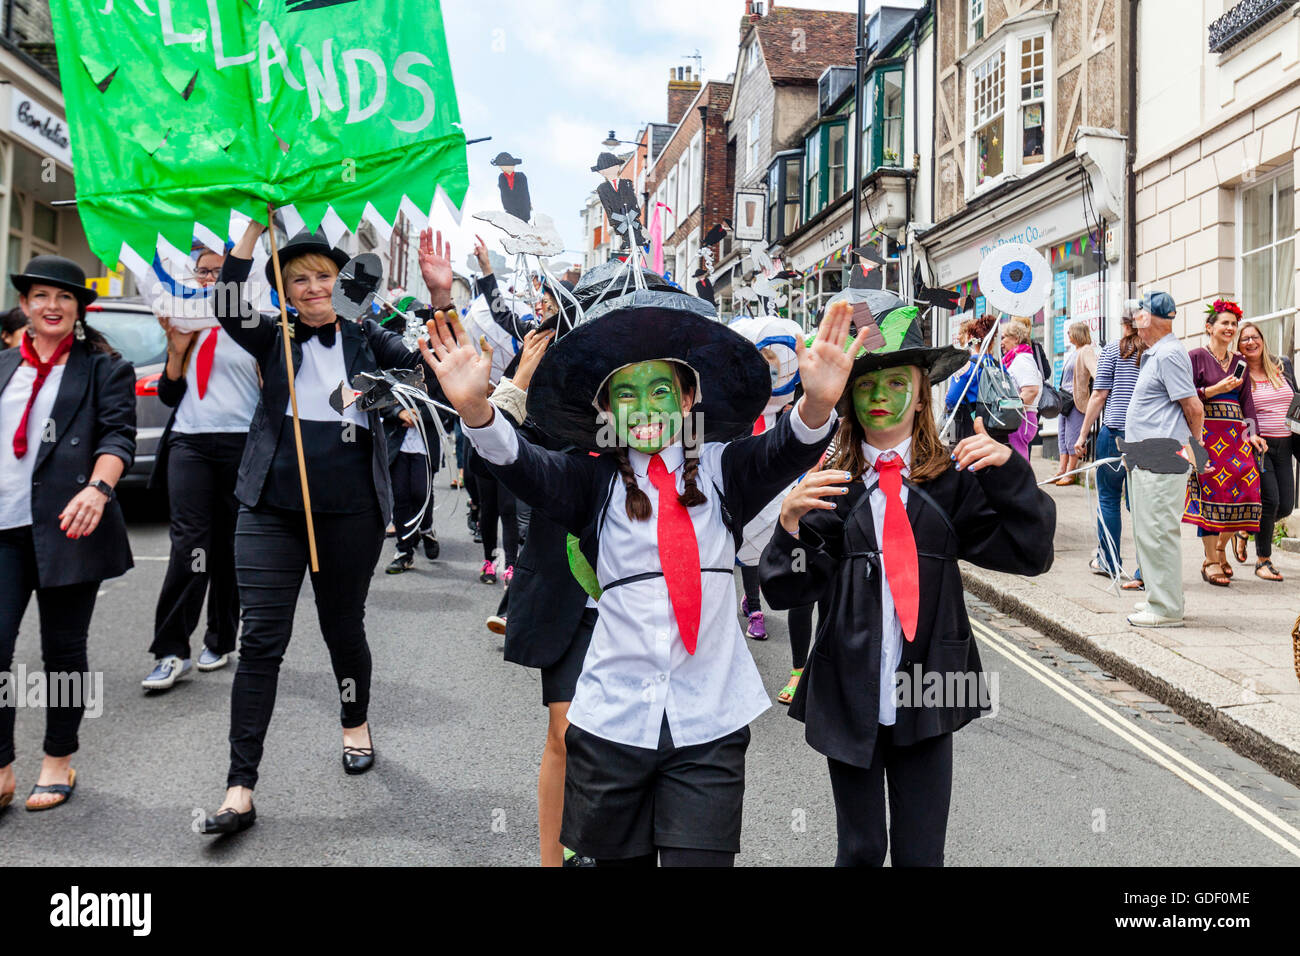 Local Children In Parade Through The Streets Of Lewes During The Annual Schools 'Moving On' Parade, High Street, Lewes, UK Stock Photo